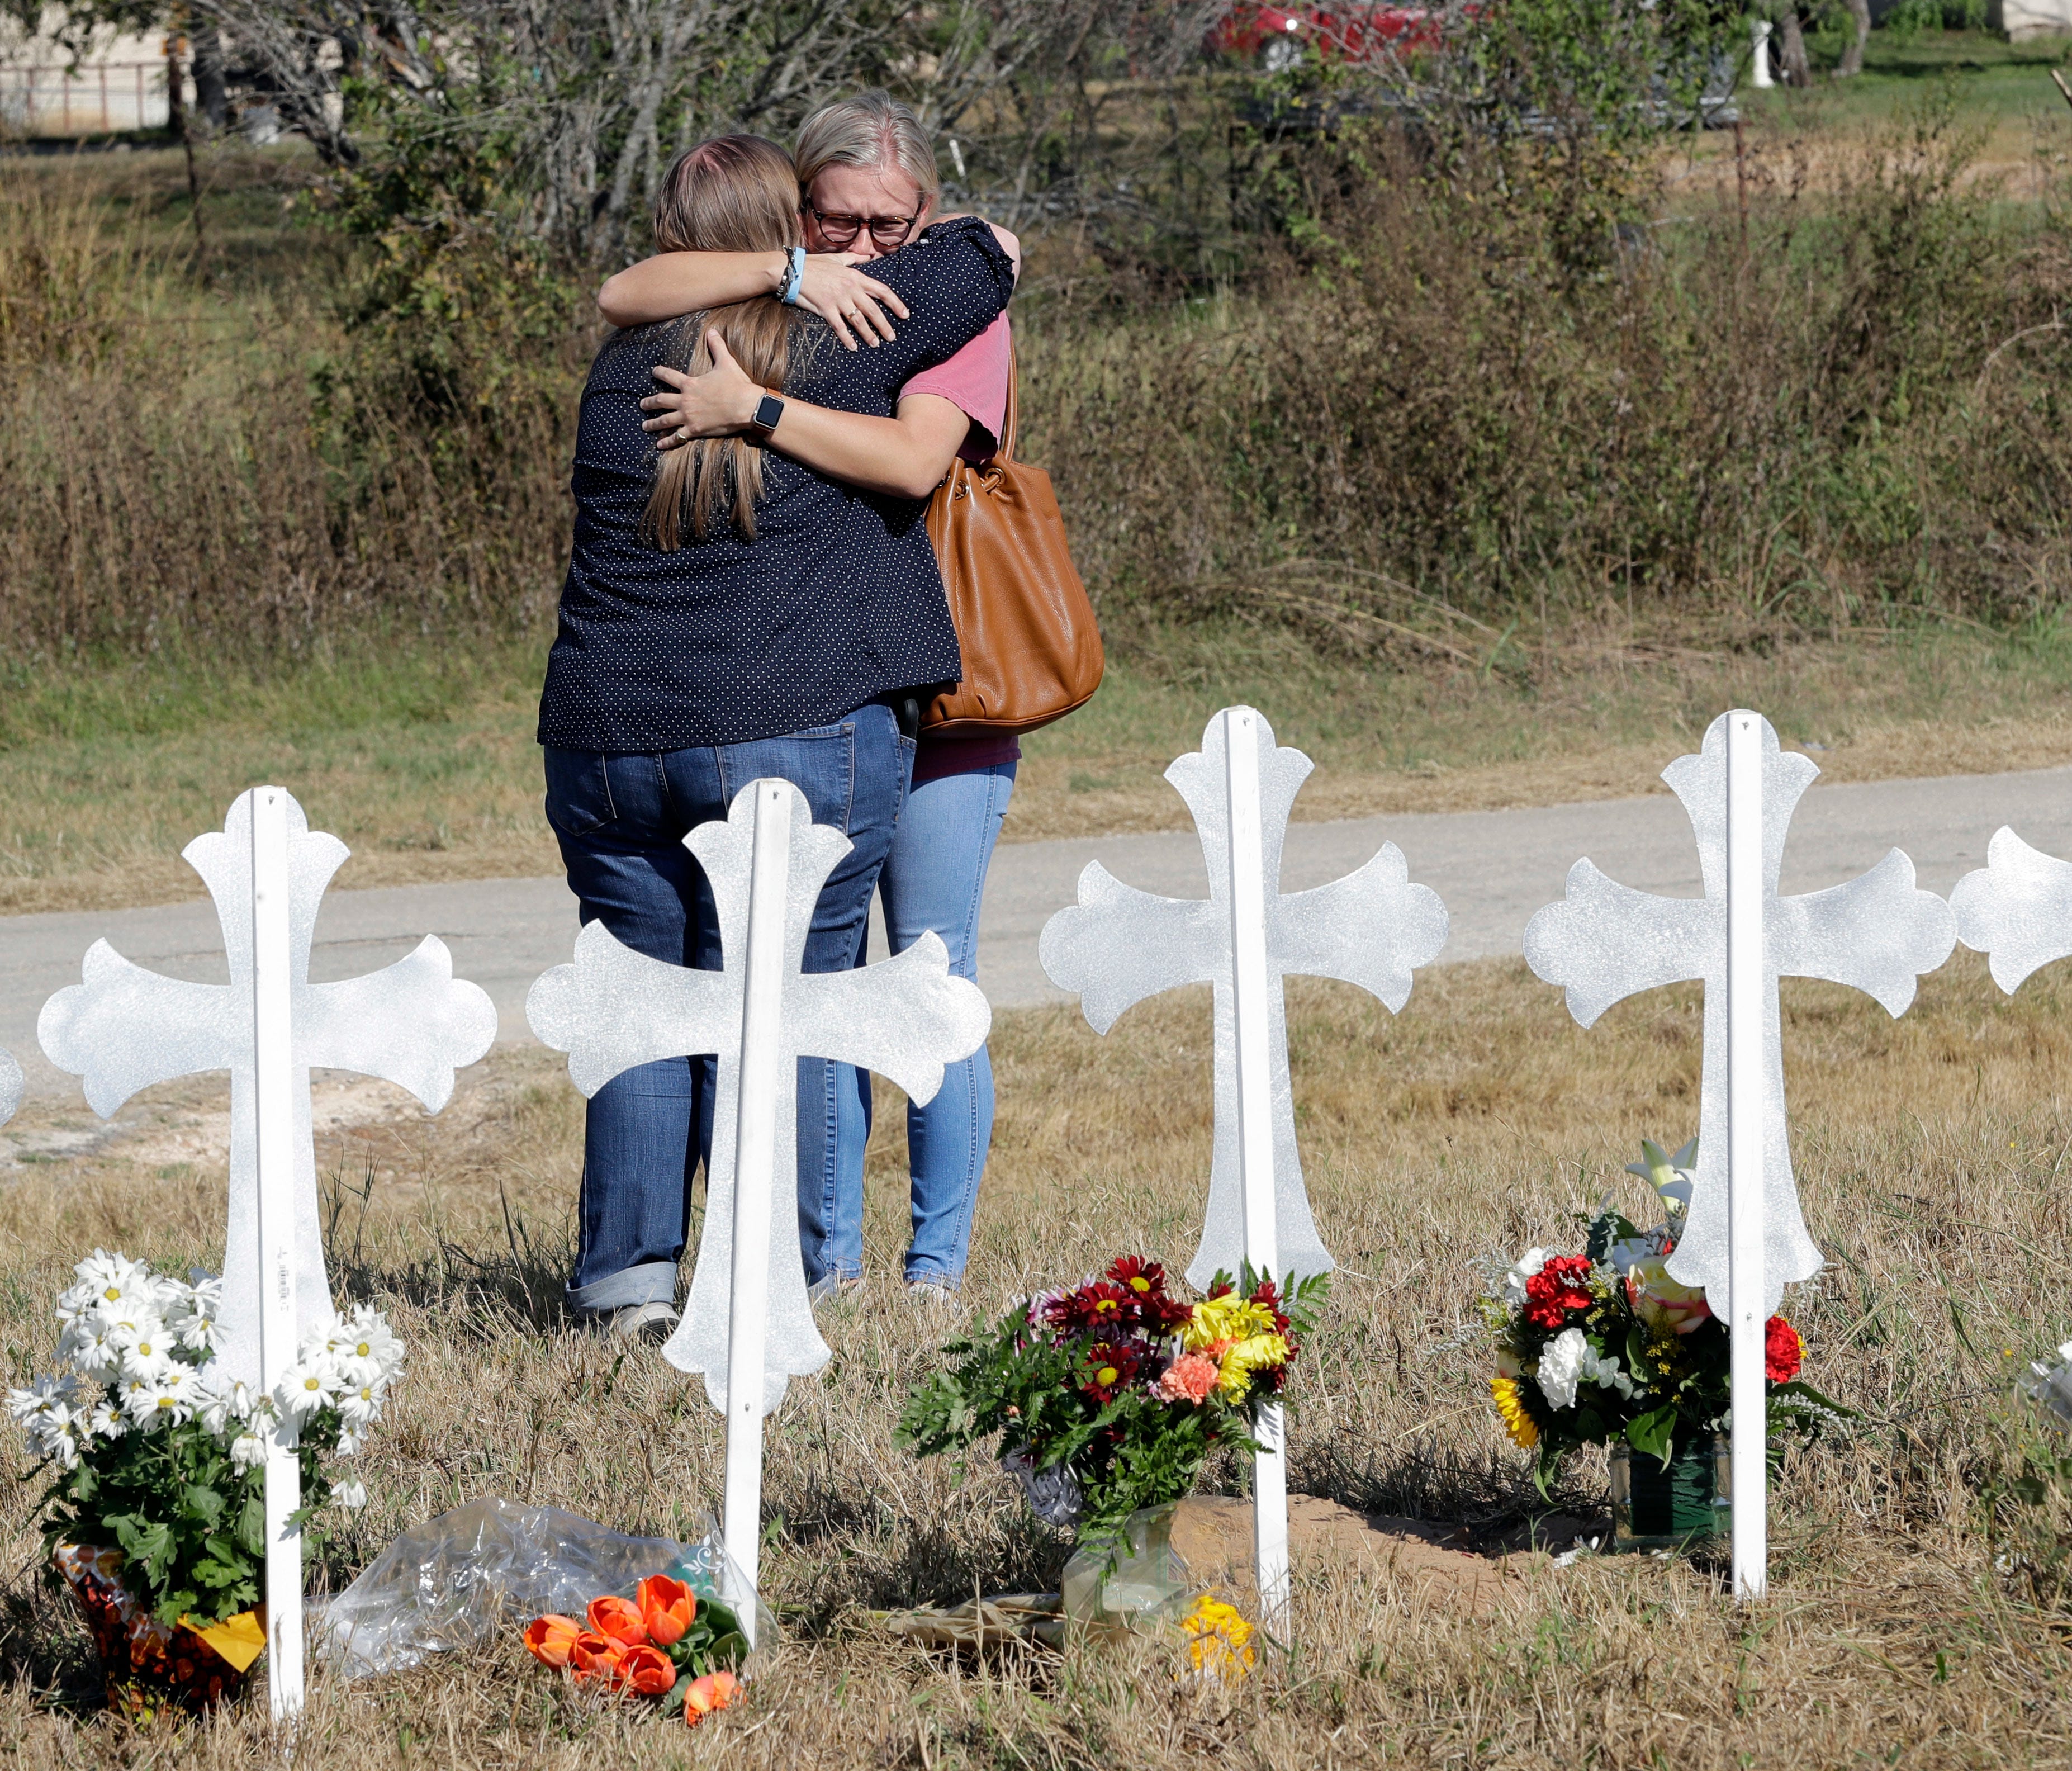 Two women hug at a makeshift memorial for the First Baptist Church shooting victims  in Sutherland Springs, TX, Nov. 7, 2017.  A man opened fire inside the church in the small South Texas community on Sunday, killing more than two dozen and injuring 